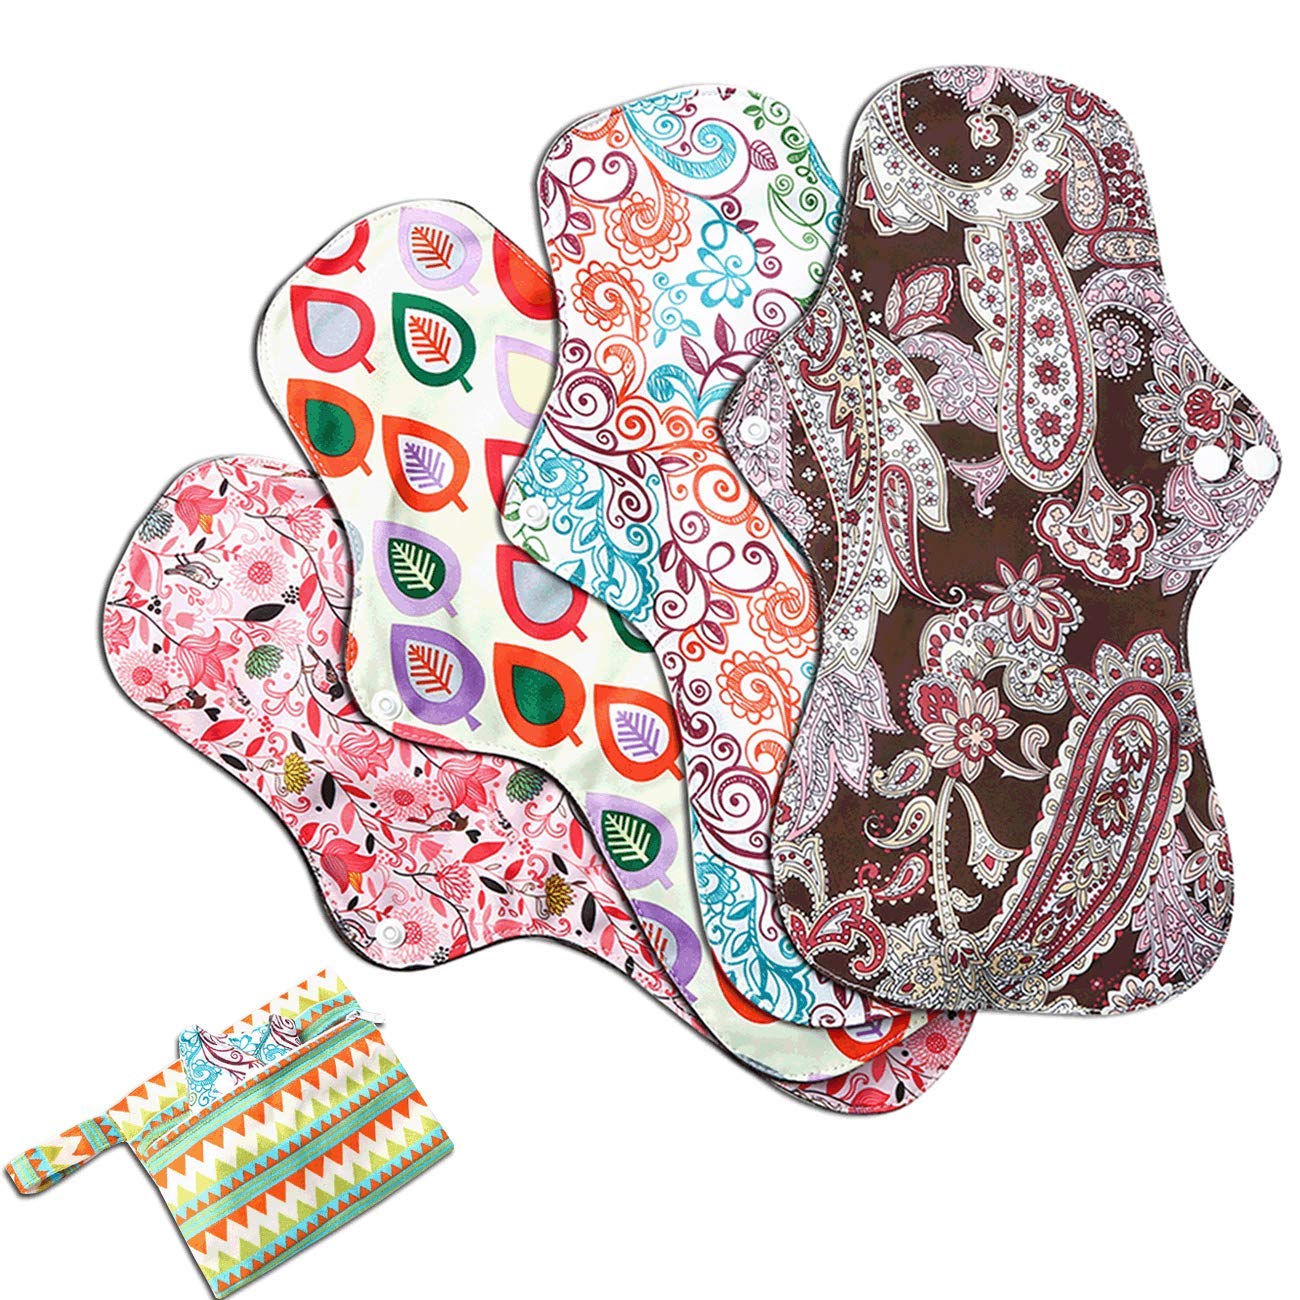 Asenappy 4 PCs Cloth Sanitary Pads Reusable X Large Cloth Menstrual Pads  for Heavy Flow Night Use + Wet Bag Multicolor B